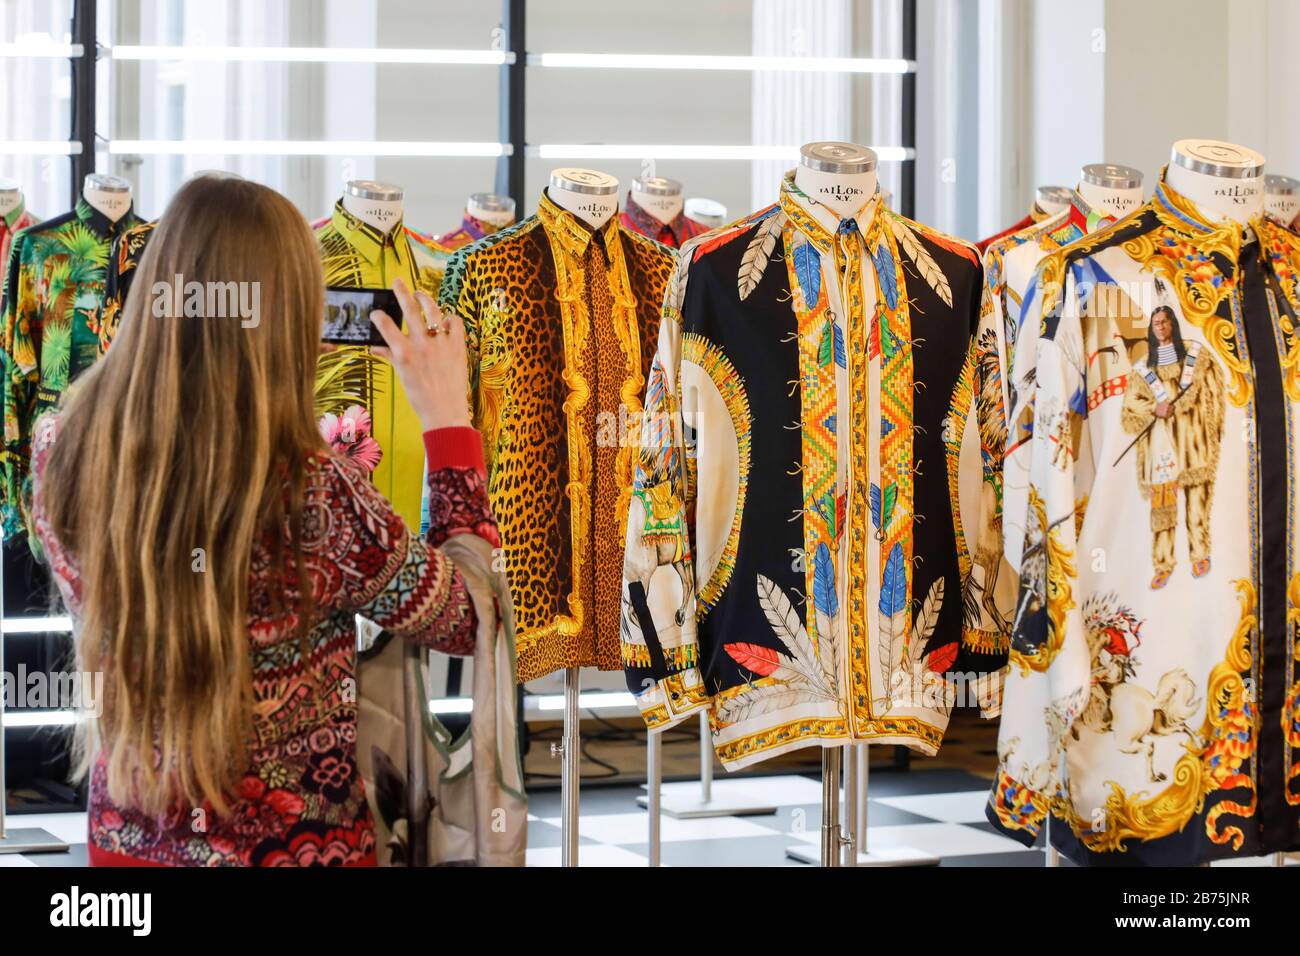 View of the Gianni Versace Retrospective exhibition in Berlin, on  05.02.2018. Versace exhibited in Berlin for the first time in 1994. Three  years later he was murdered in Florida. 20 years after